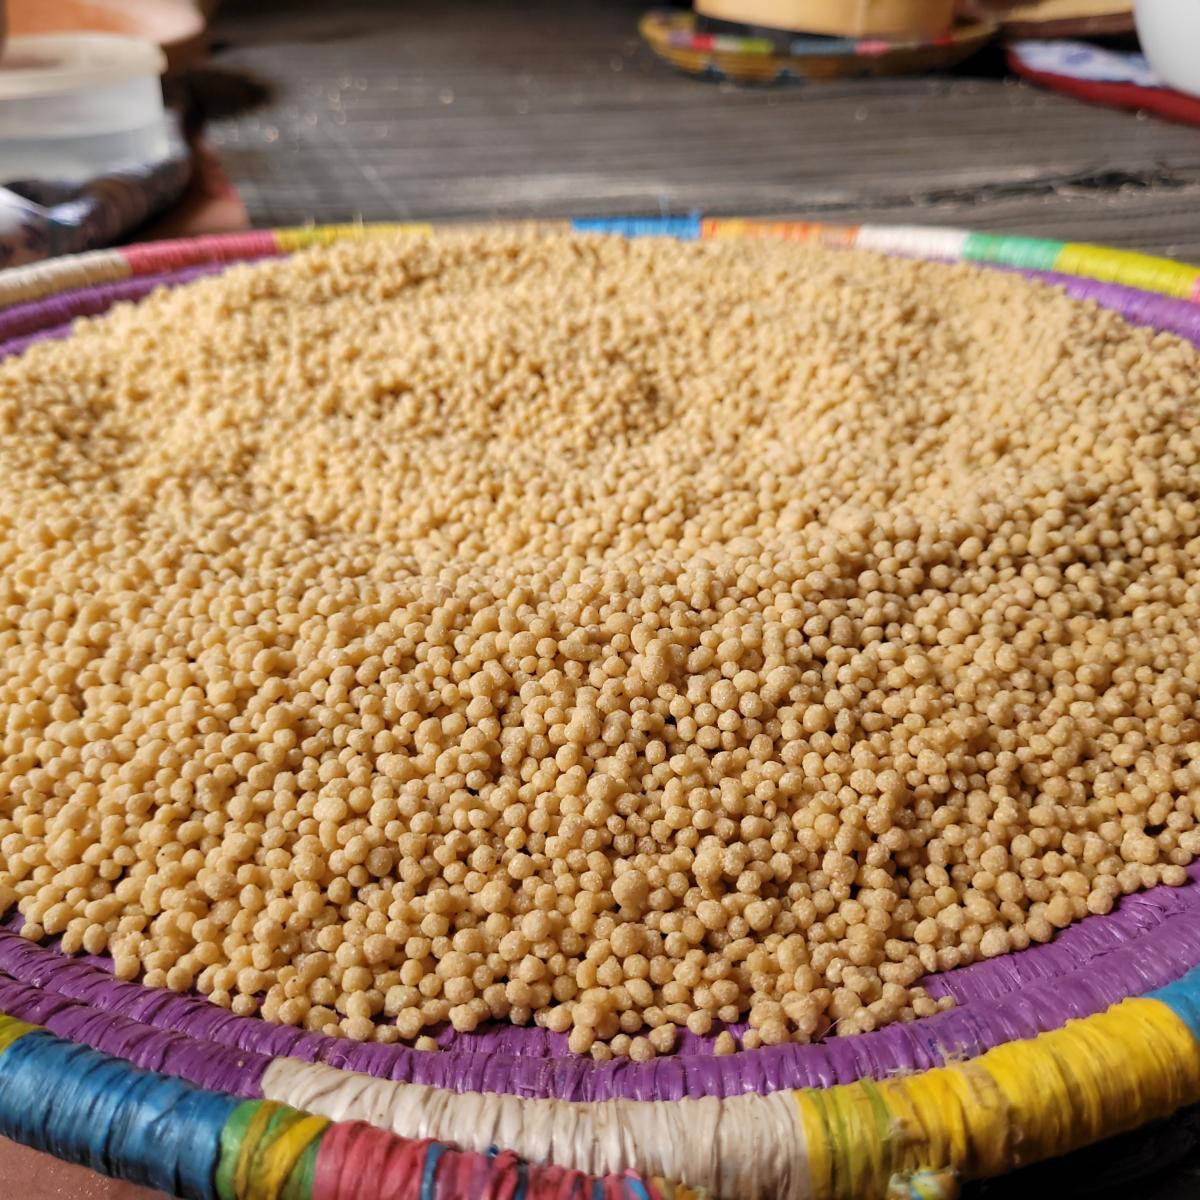 Couscous being processed rests in a colorful wicker bowl